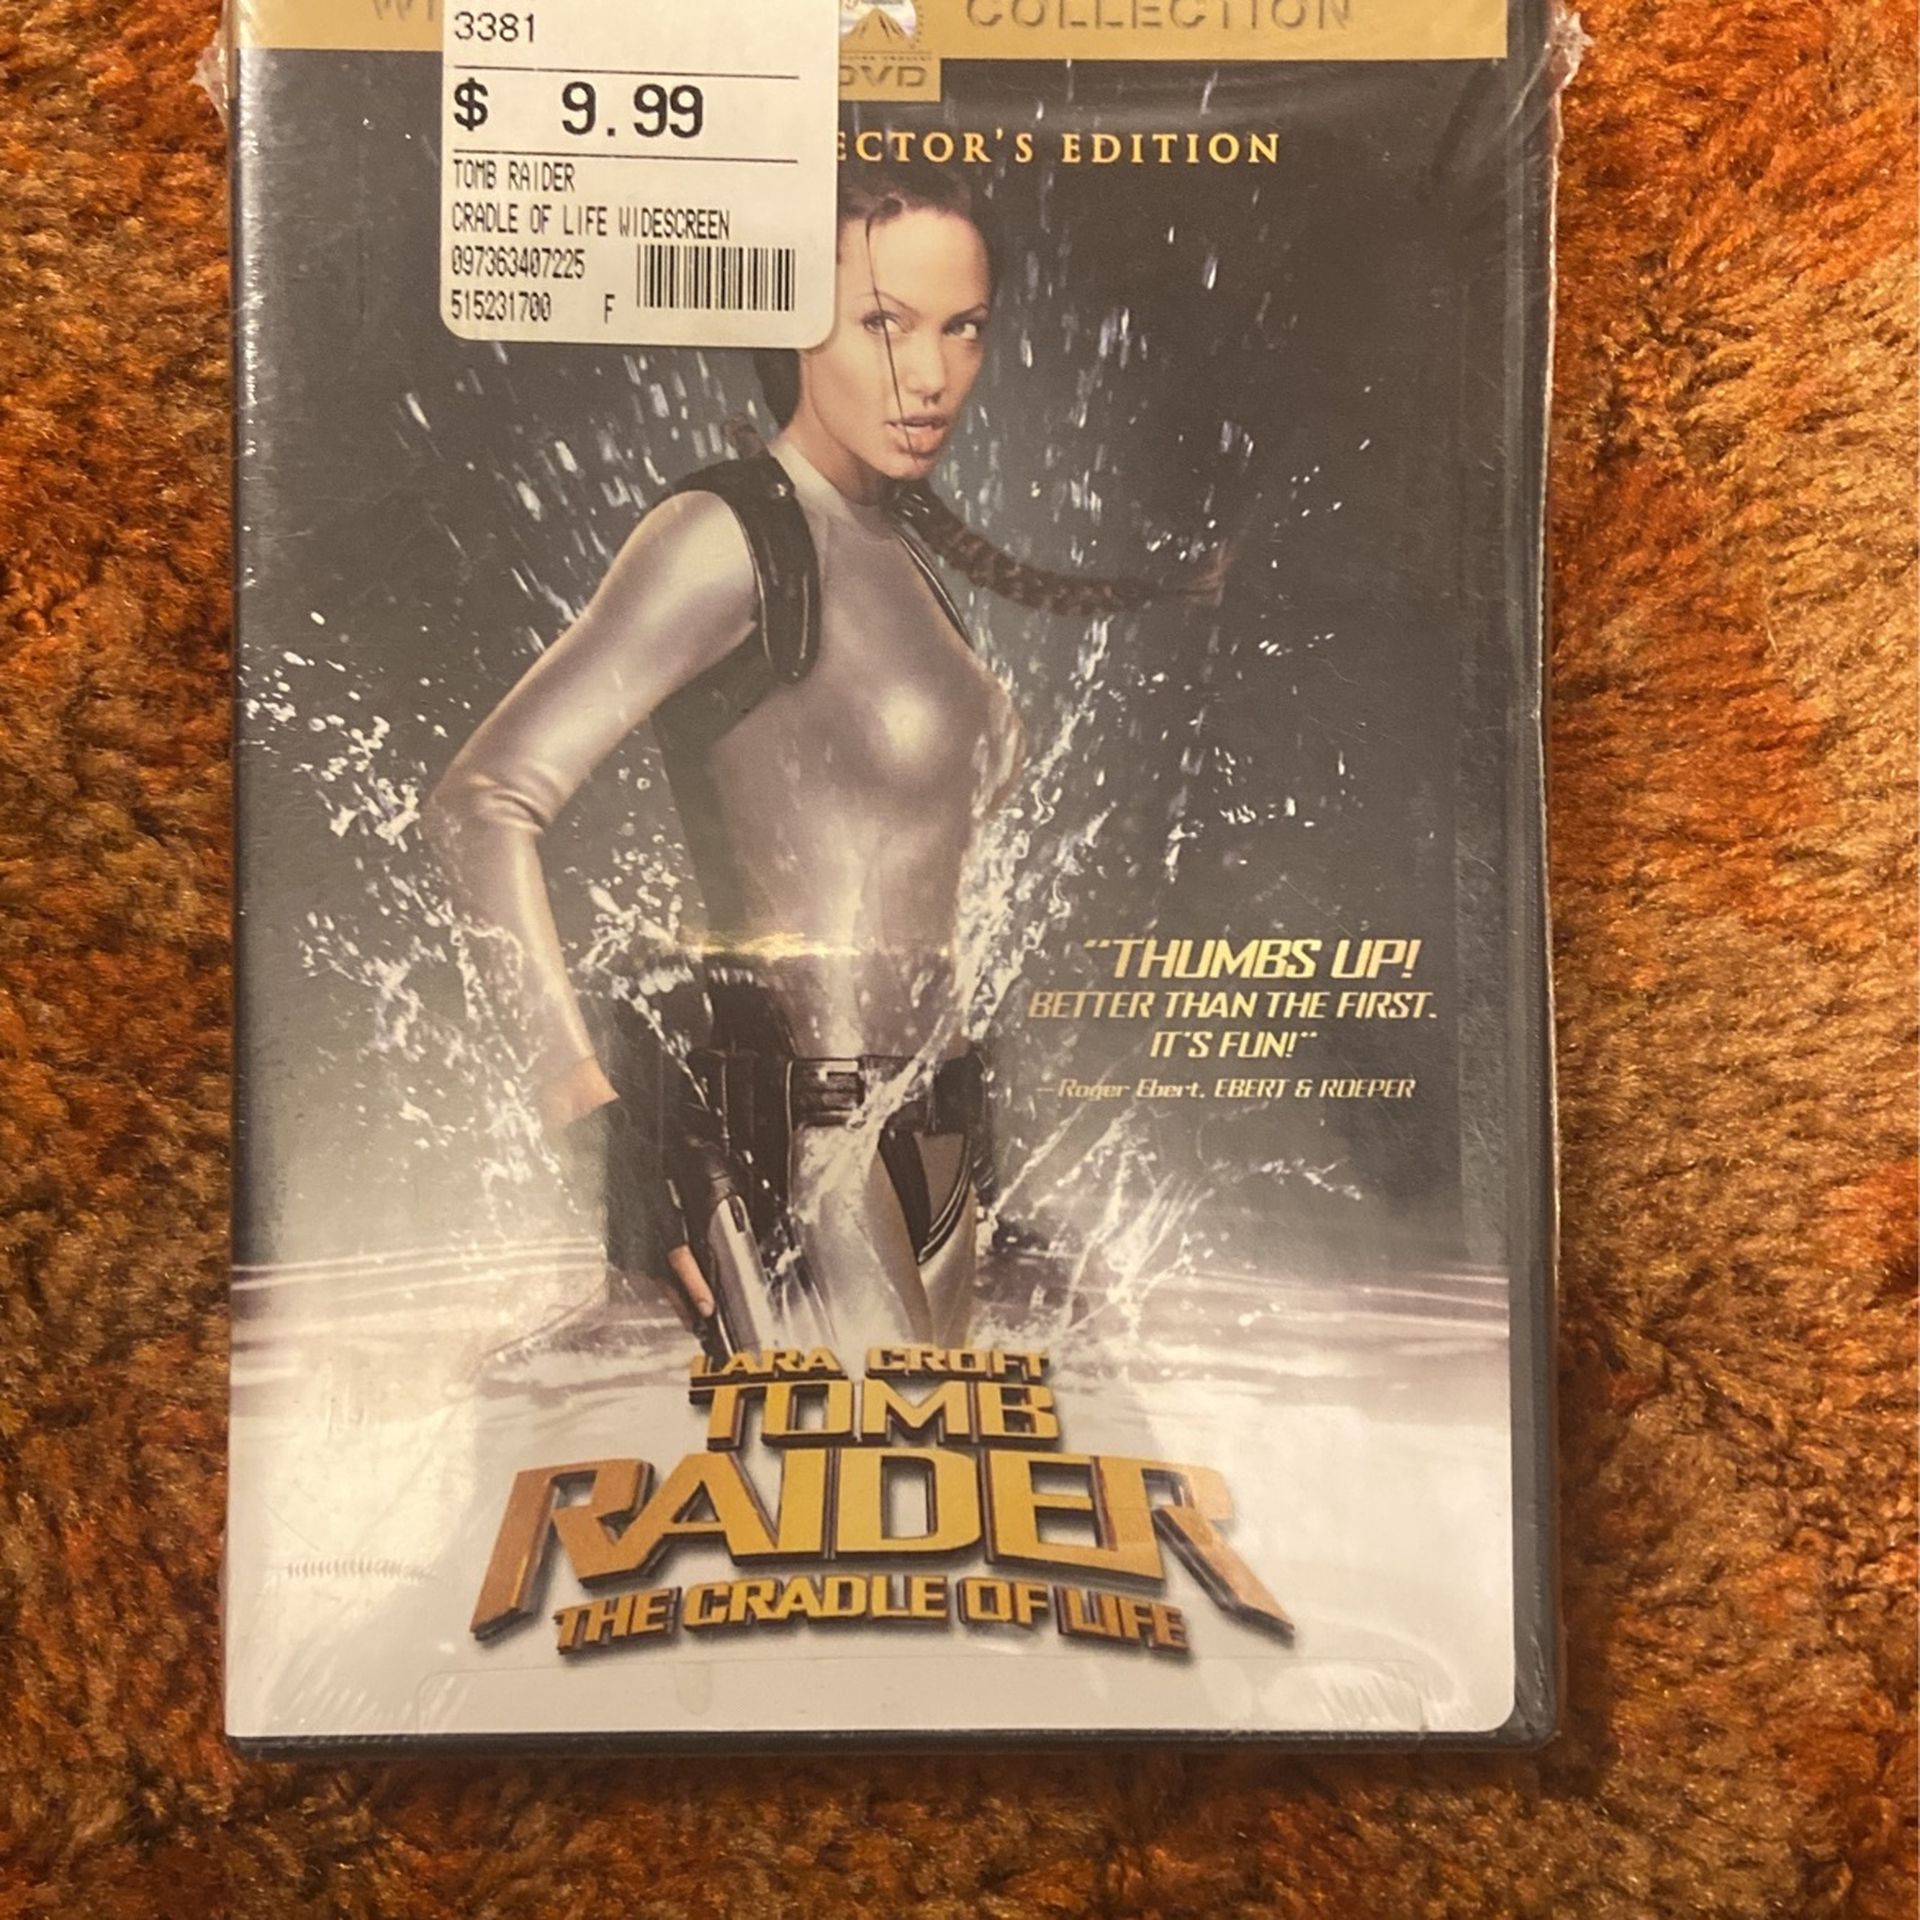 Lara Croft: Tomb Raider - The Cradle of Life (Widescreen Special Collector's Edition) DVD 